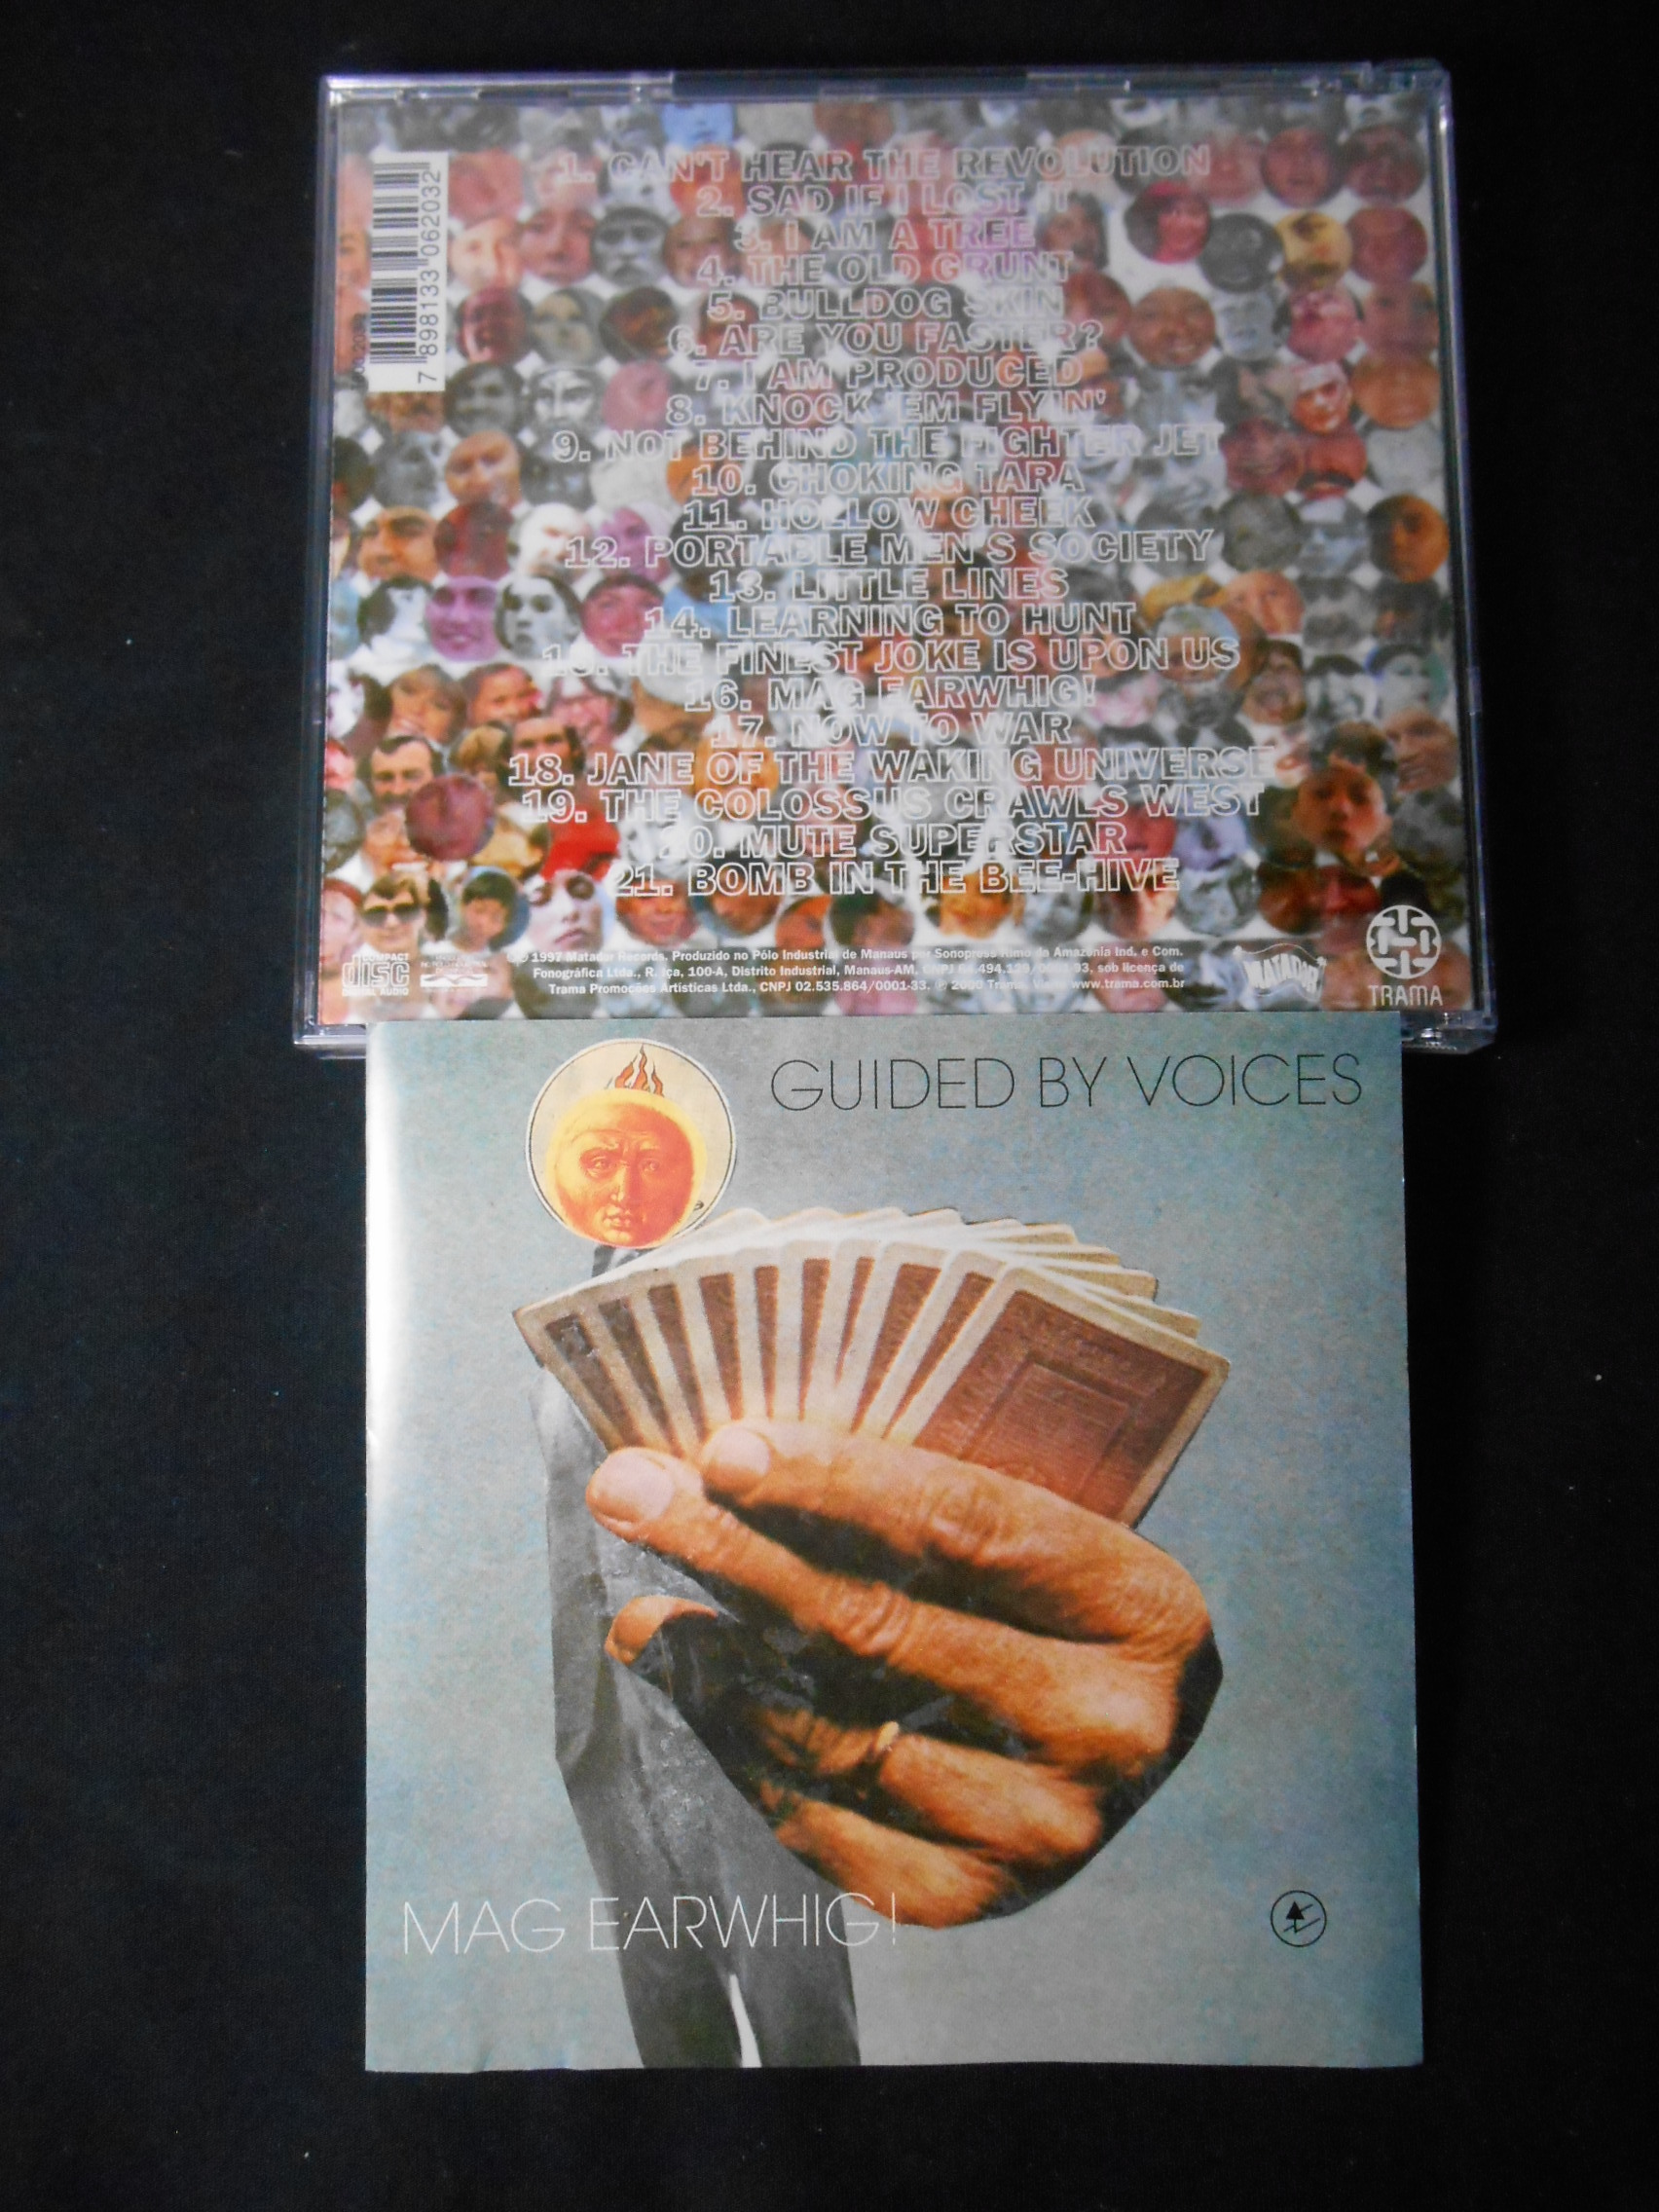 CD - Guided by Voices - Mag Earwhig!